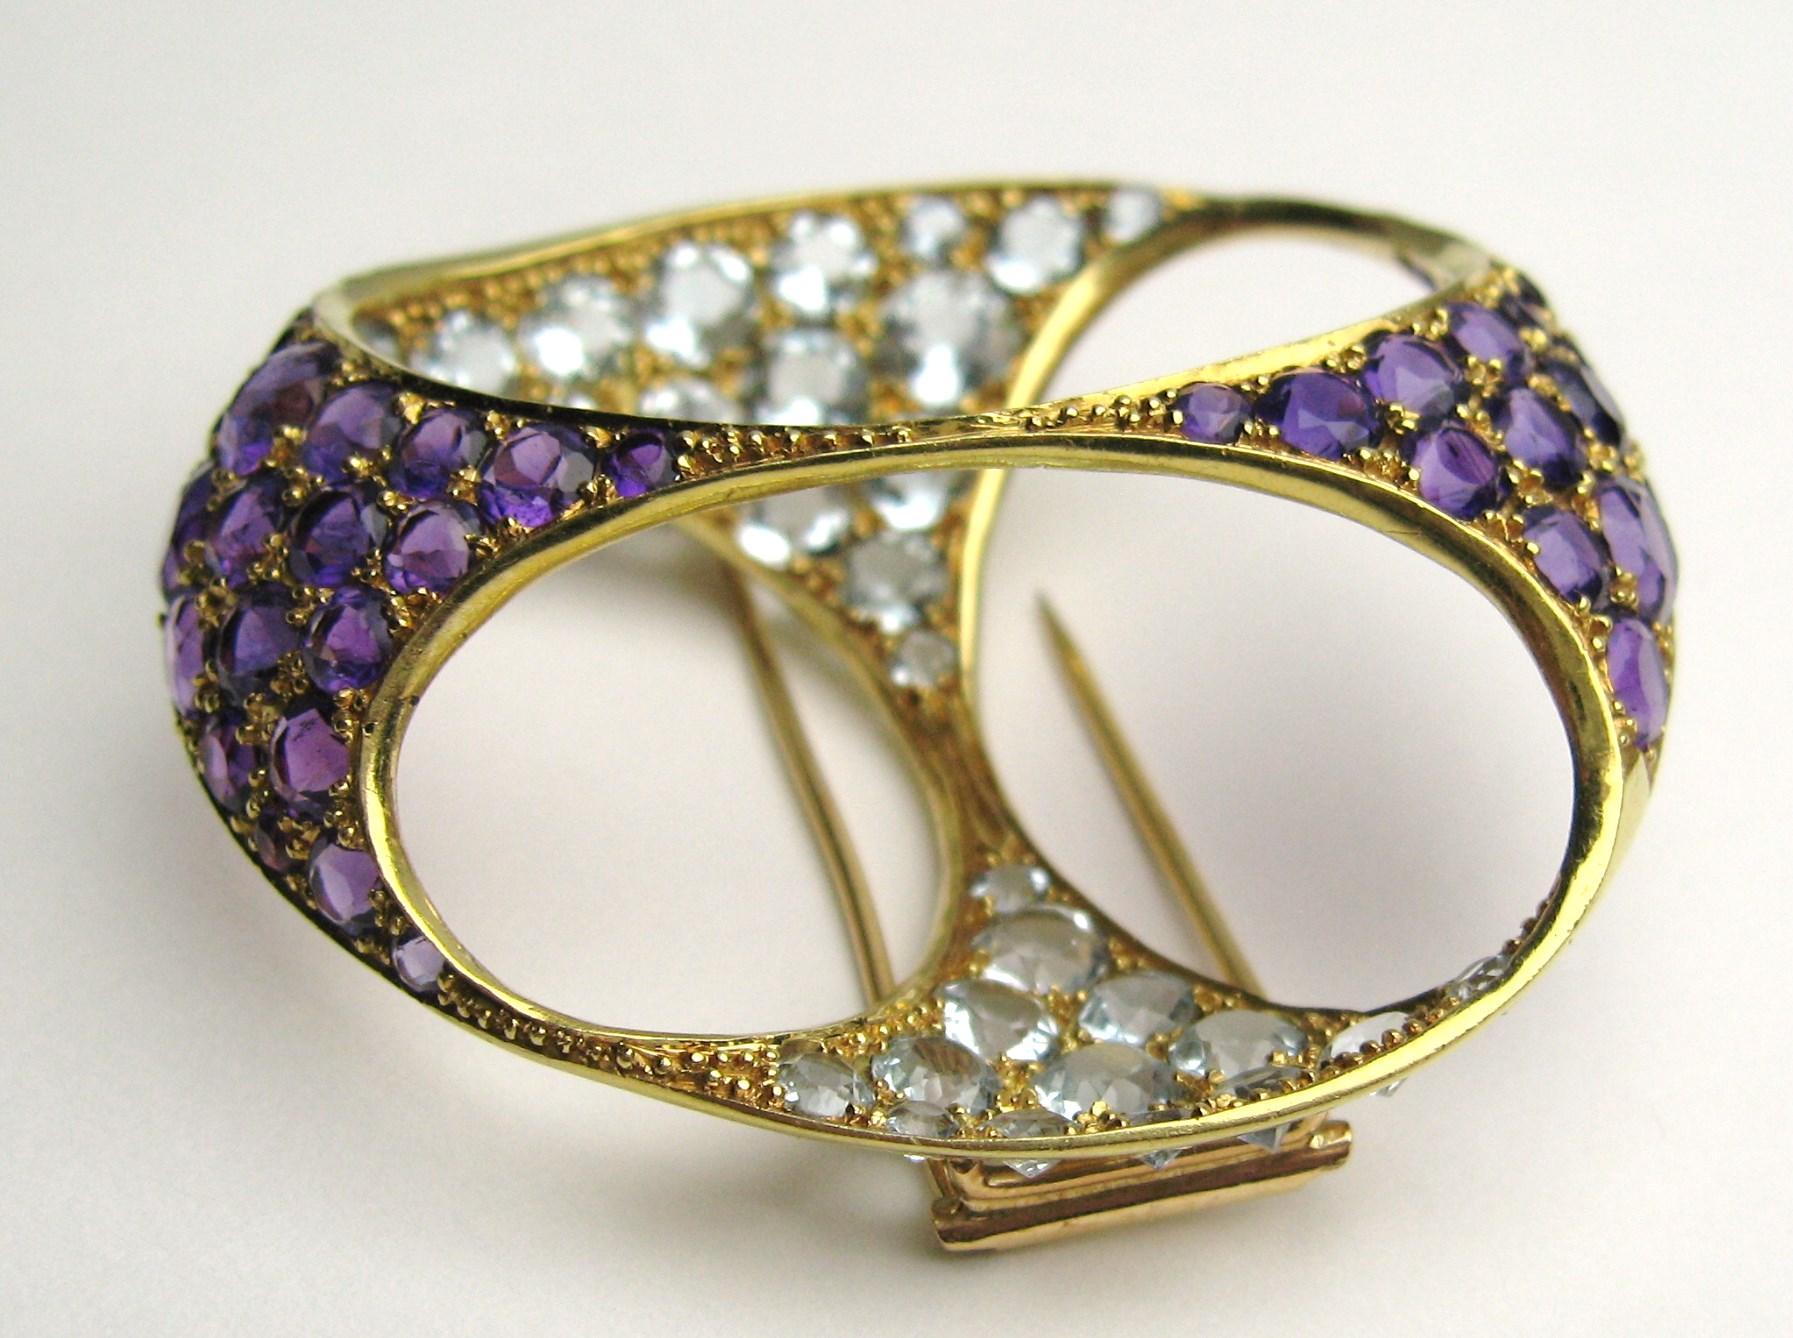 We have a stunning 18K Gold Coat Clip / Brooch adorned with amethysts and aquamarine stones, Approximately 6 carats of Aquamarine and Approximately 6 carats of Amethysts.  Measuring 1.93